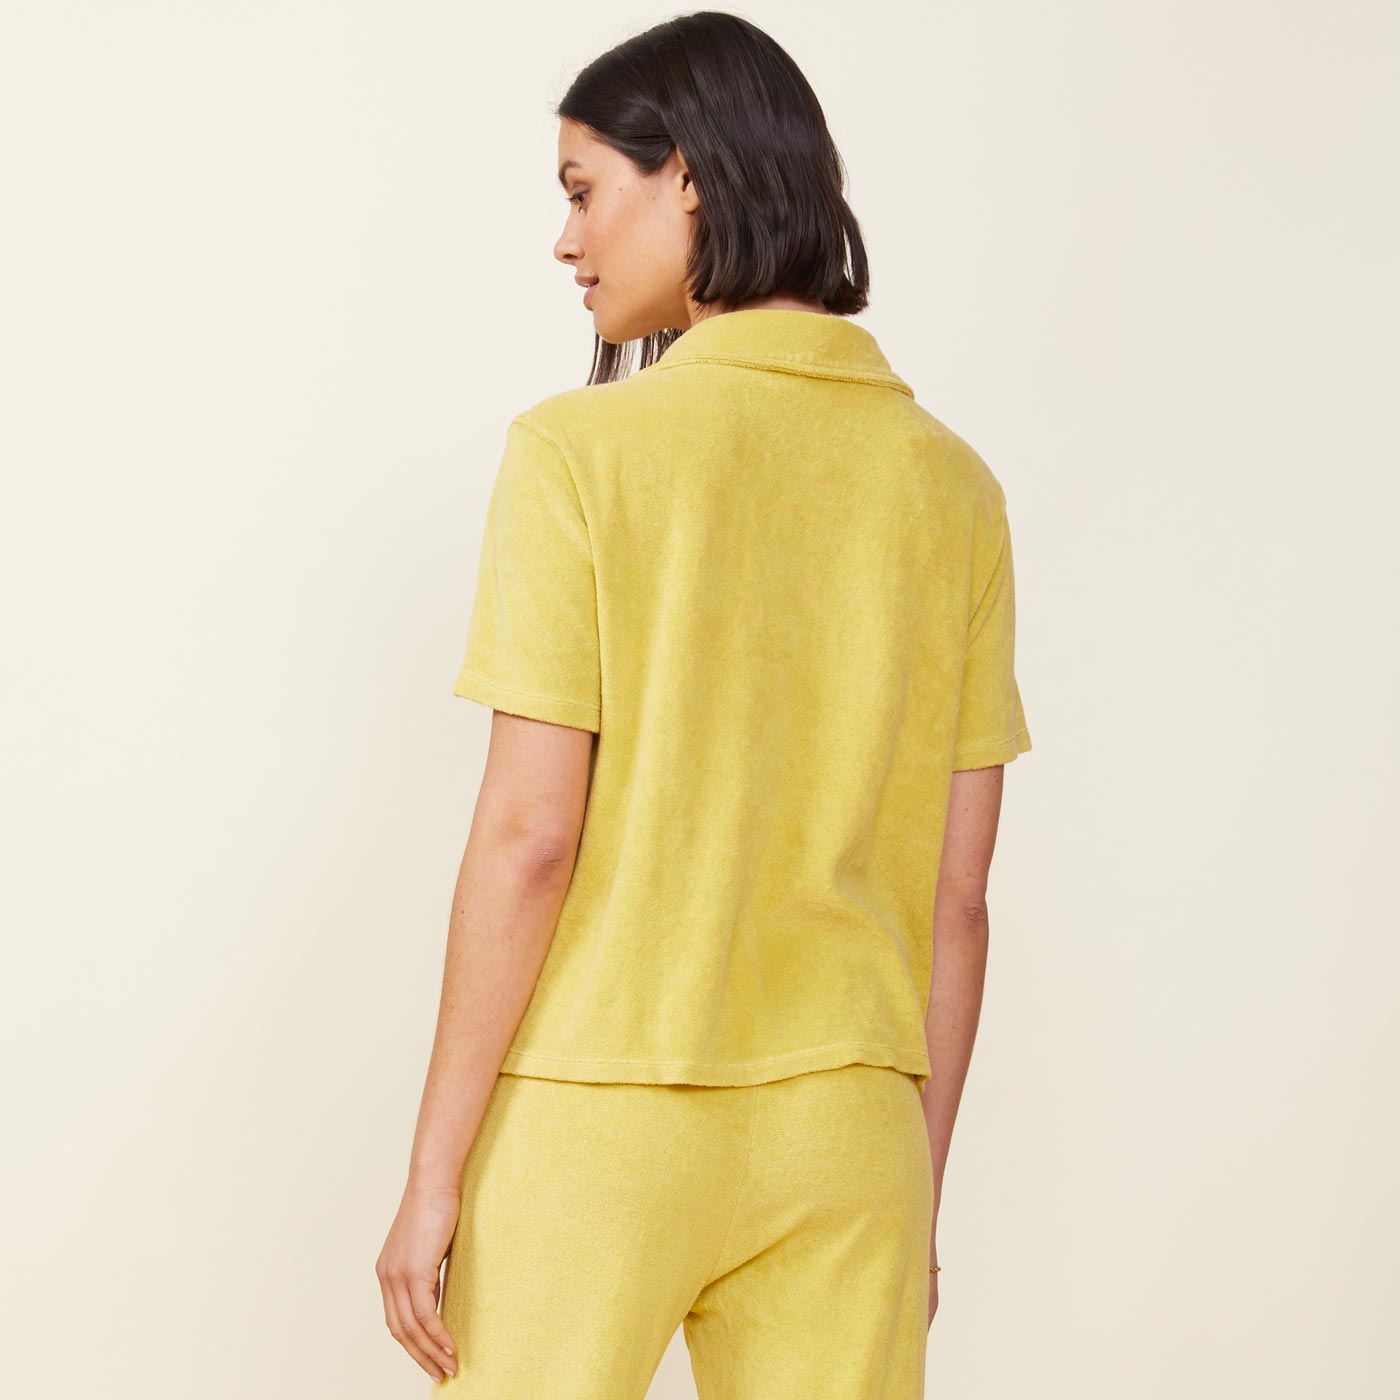 Back view of model wearing the terry cloth pocket shirt in kiwi.